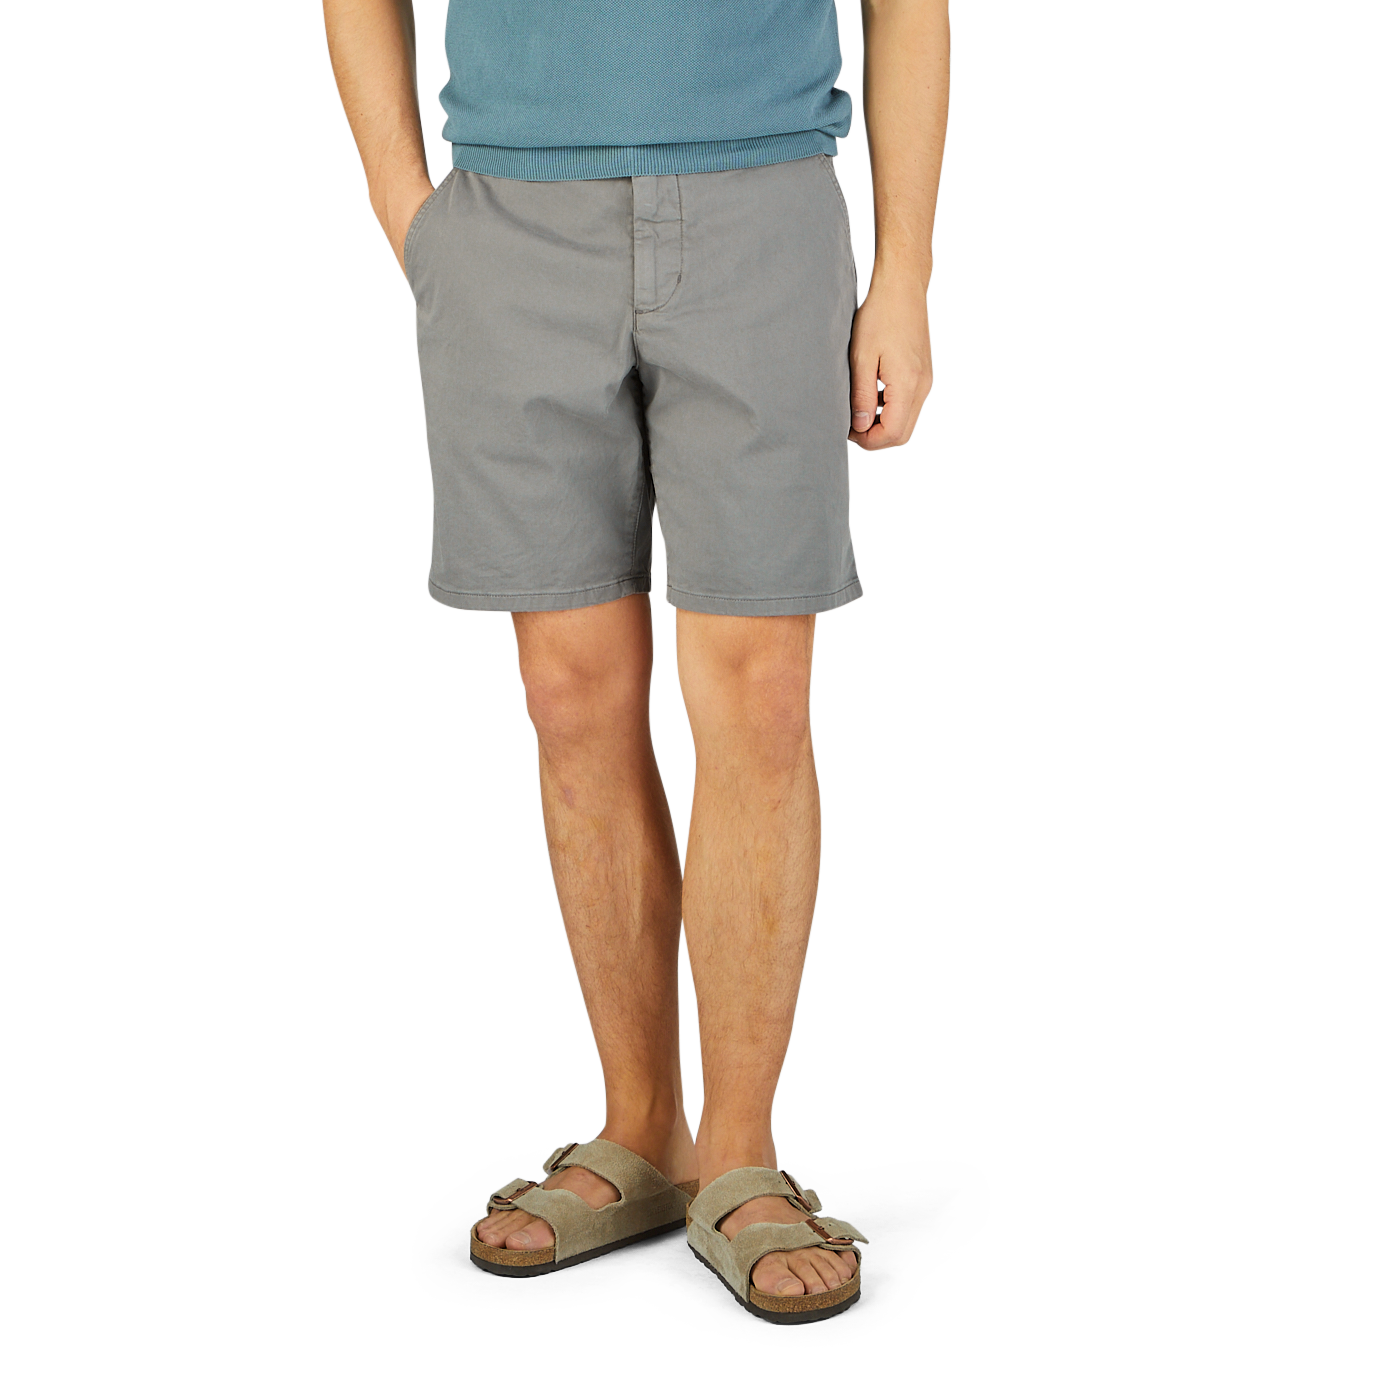 Man in a blue t-shirt and Slate Grey Cotton Blend Phillips shorts by Paige, wearing beige sandals, standing on a yellow textured surface.